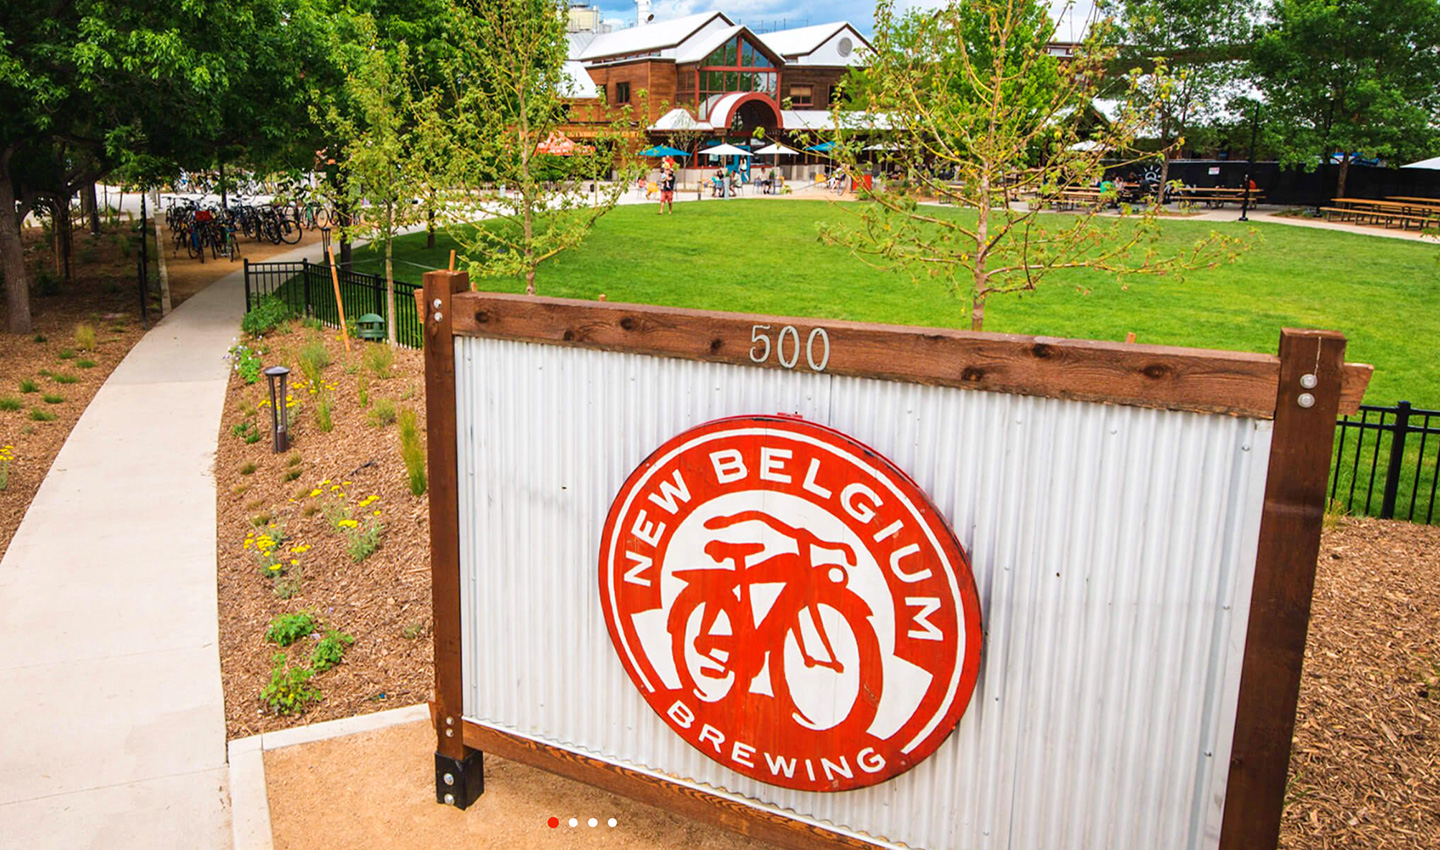 Fort Collins, CO - New Belgium Brewing Company - Travel Tips